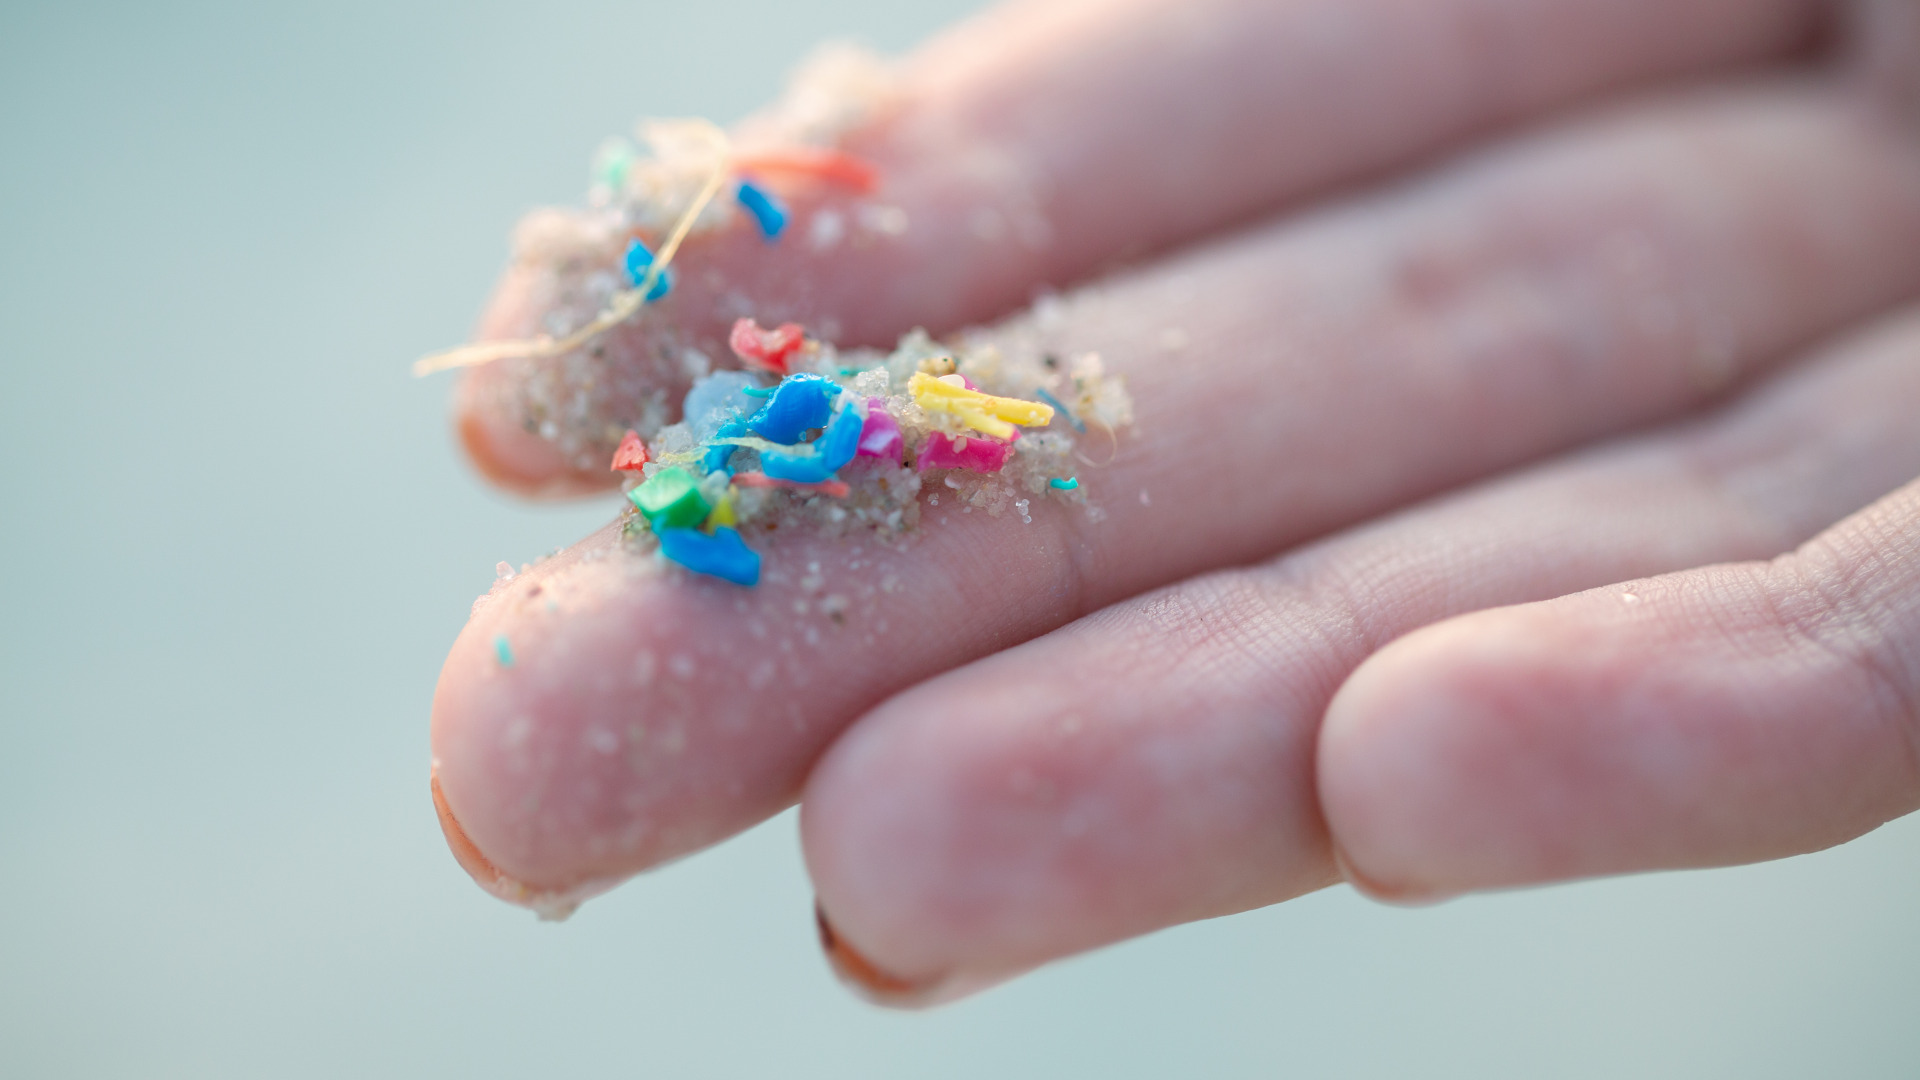 Microplastics found washed up on a beach. About 11 percent of microplastics in the atmosphere over the western U.S. come from the ocean.